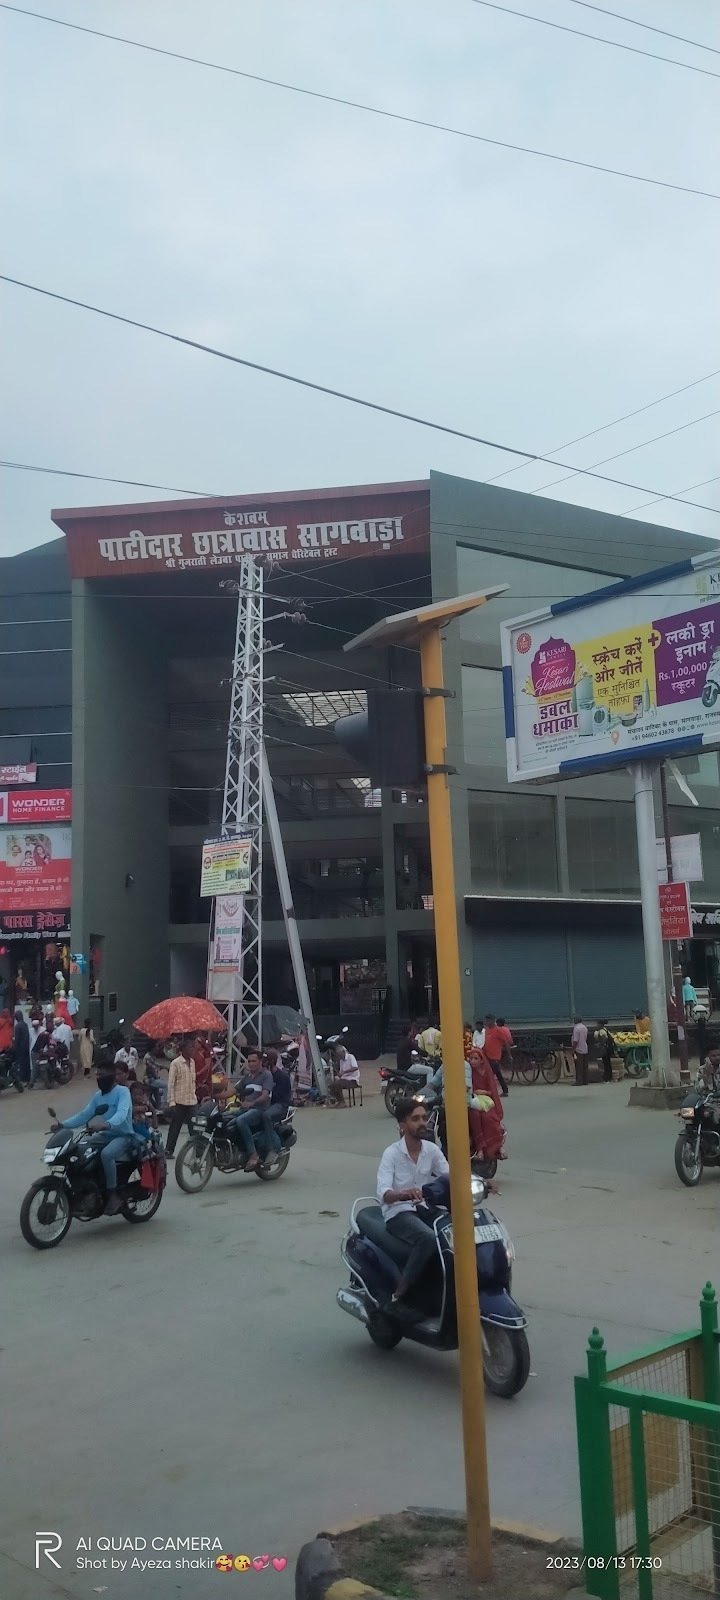 <span class="translation_missing" title="translation missing: en.meta.location_title, location_name: Sagwara Shopping Mall, city: Rajasthan">Location Title</span>